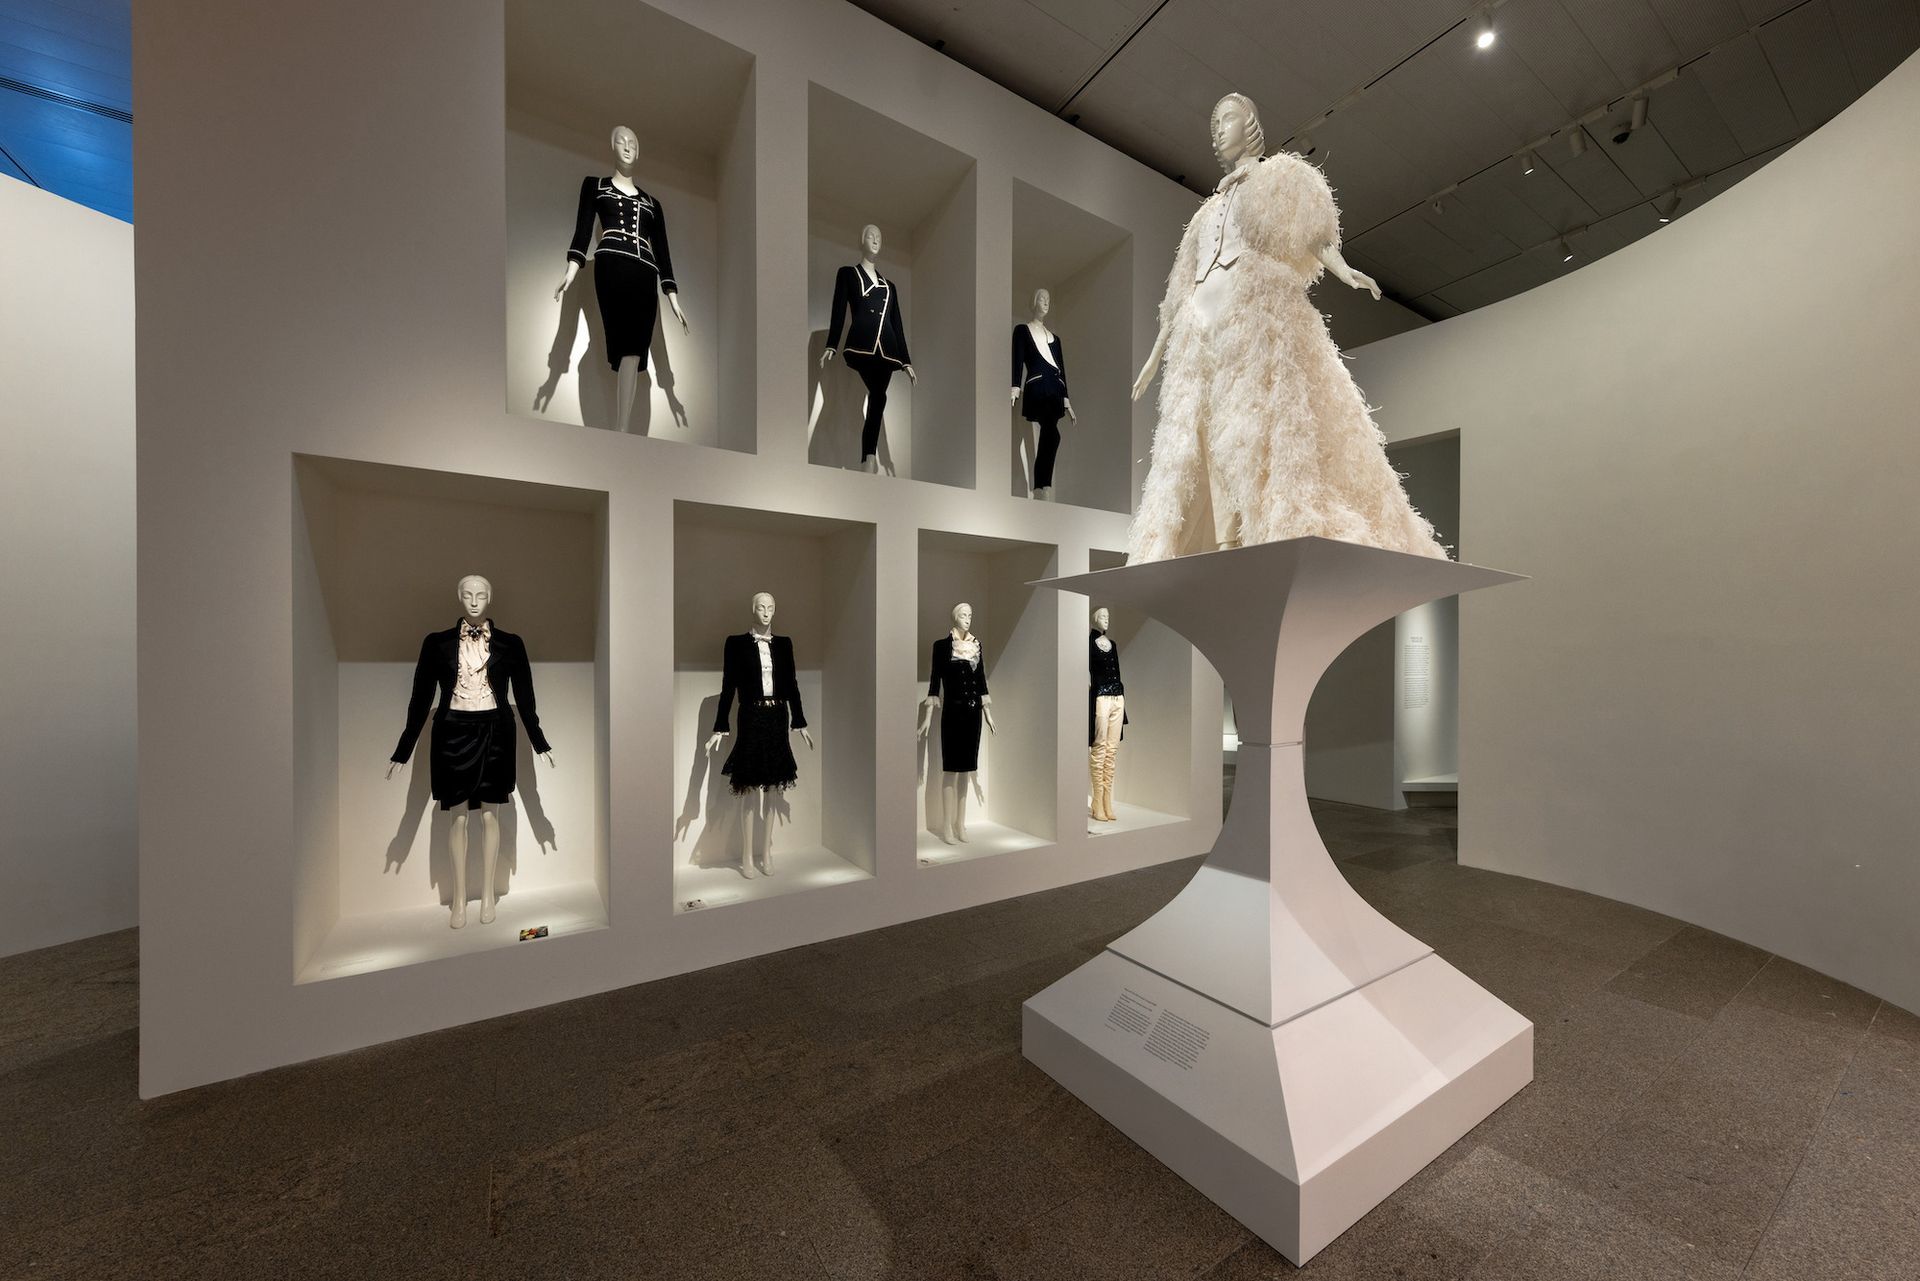 Silk camellias and bathroom tiles: Karl Lagerfeld's designs and influences  unveiled in Met (fashion) show